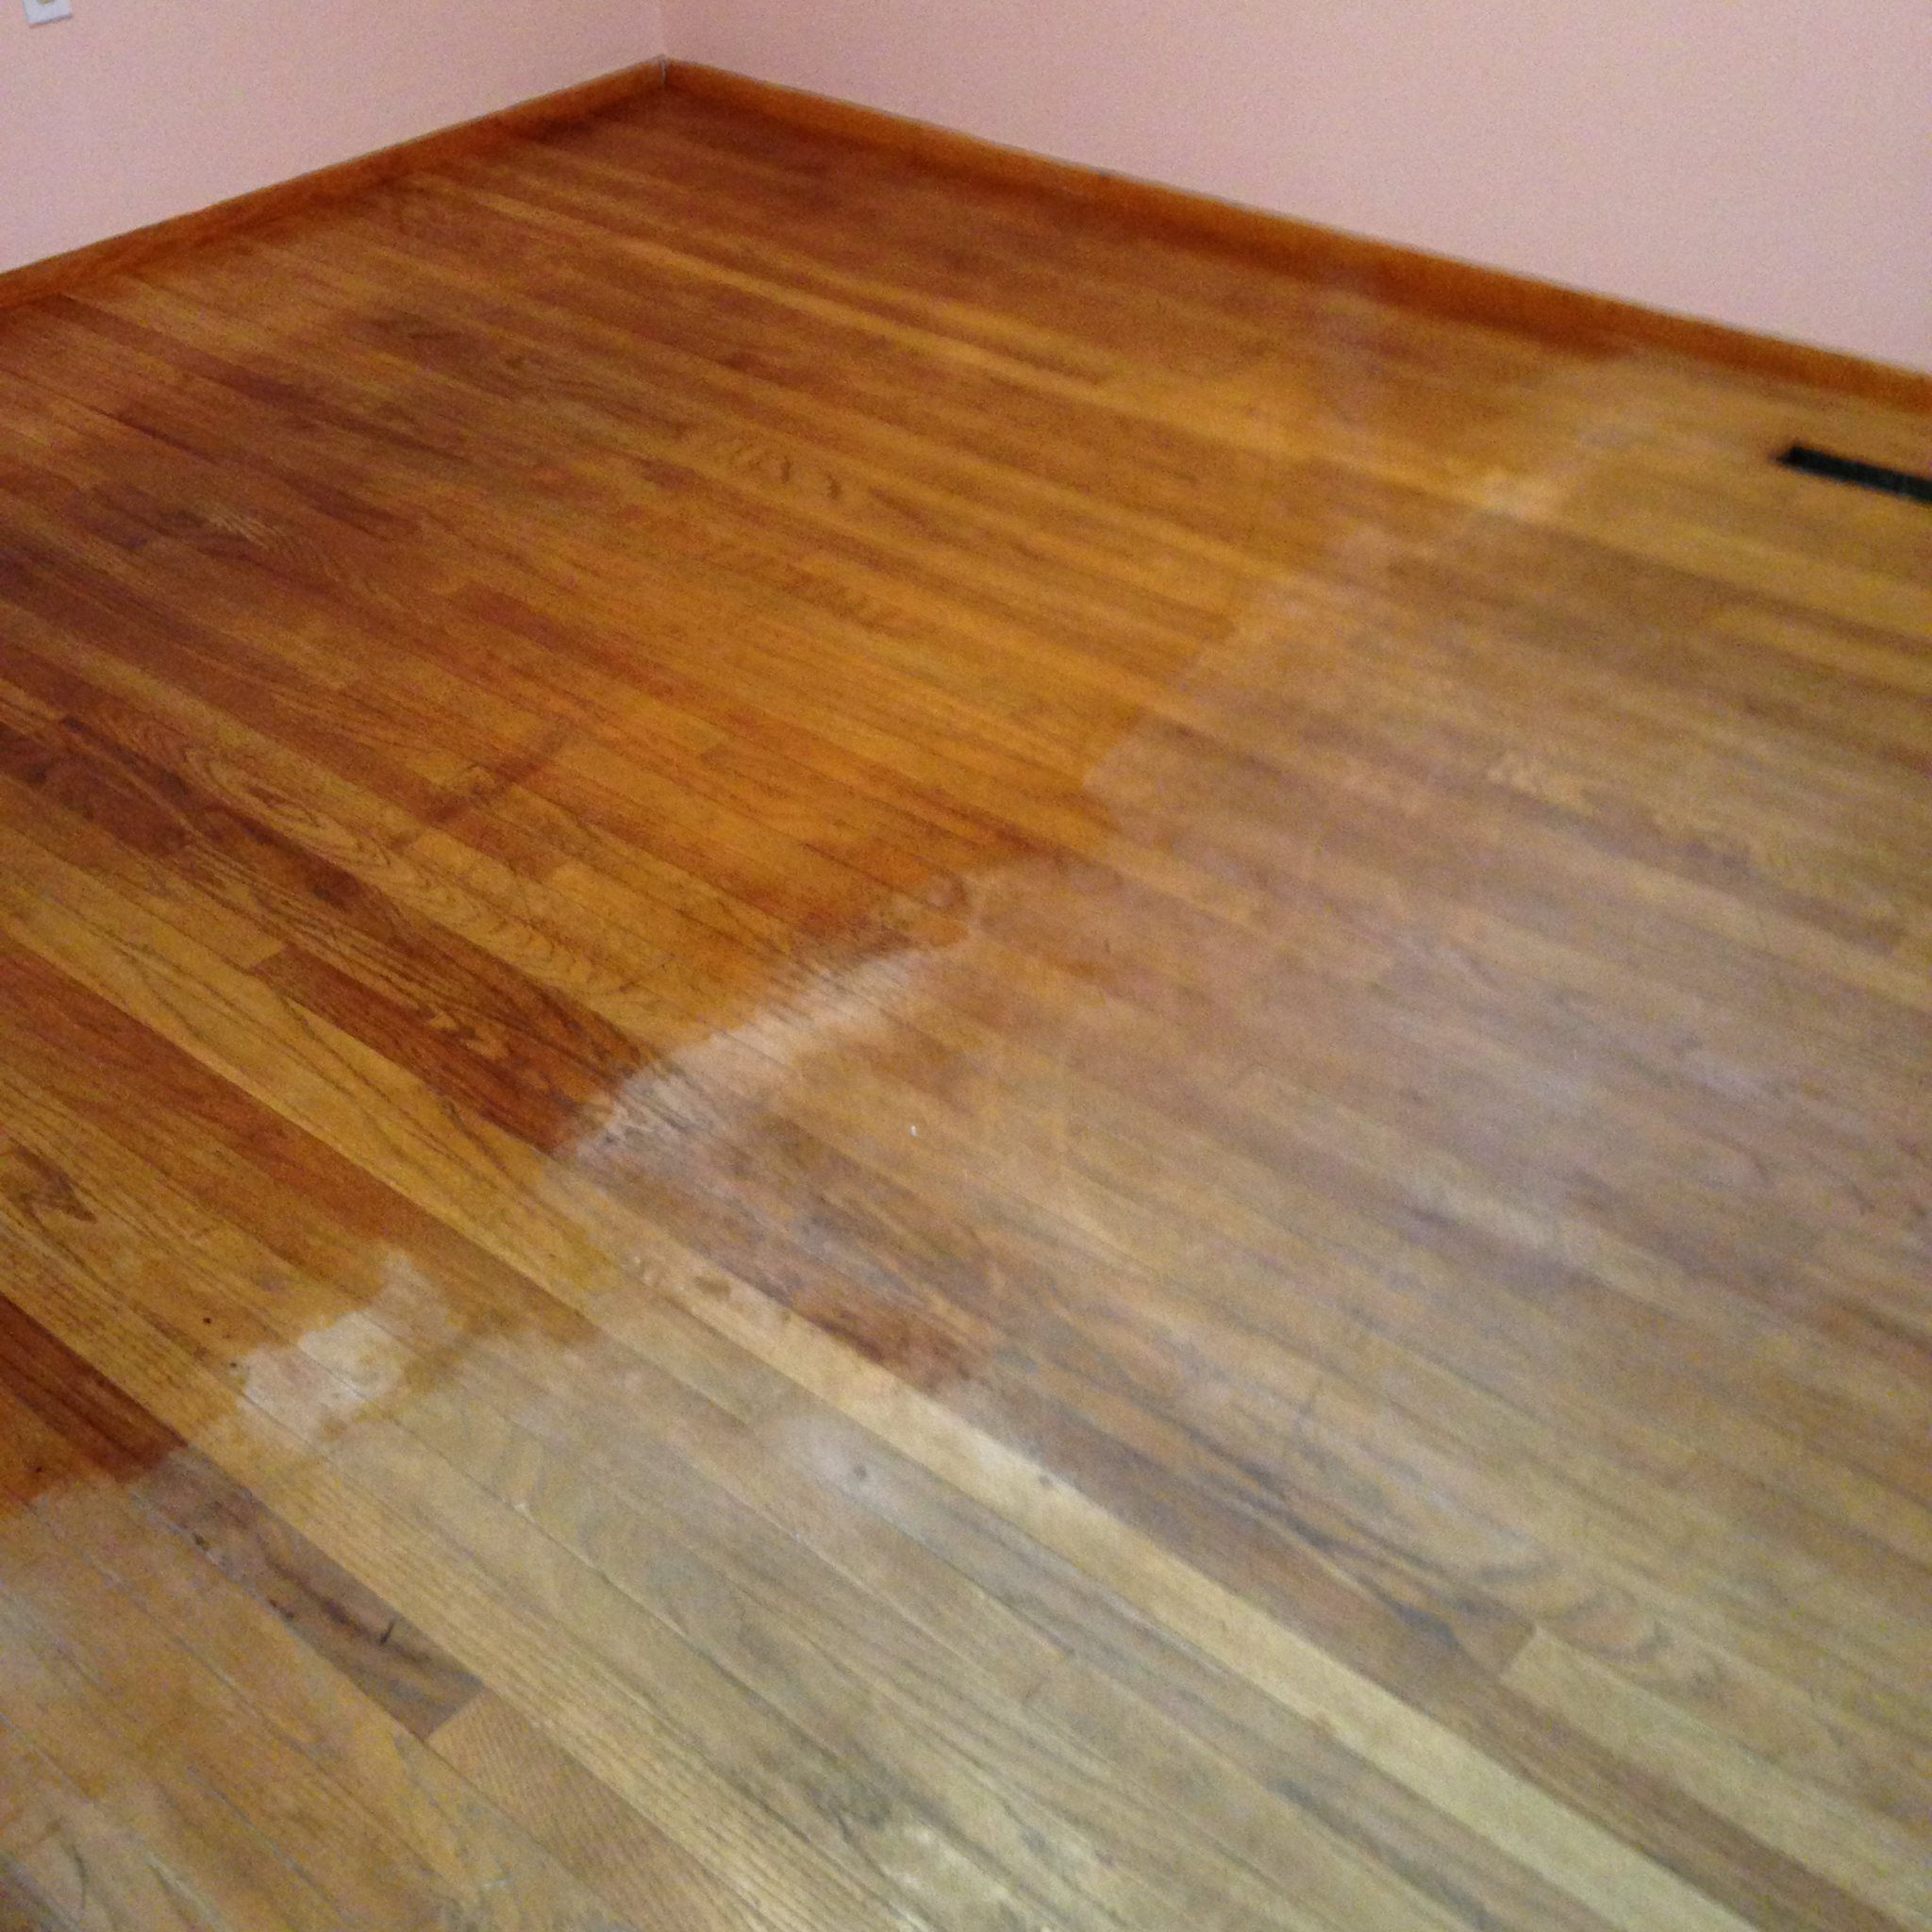 29 Trendy Resurfacing Prefinished Hardwood Floors 2024 free download resurfacing prefinished hardwood floors of image 6559 from post restoring old hardwood floors will with pertaining to wood floor hacks every homeowner needs know painting small restoring old